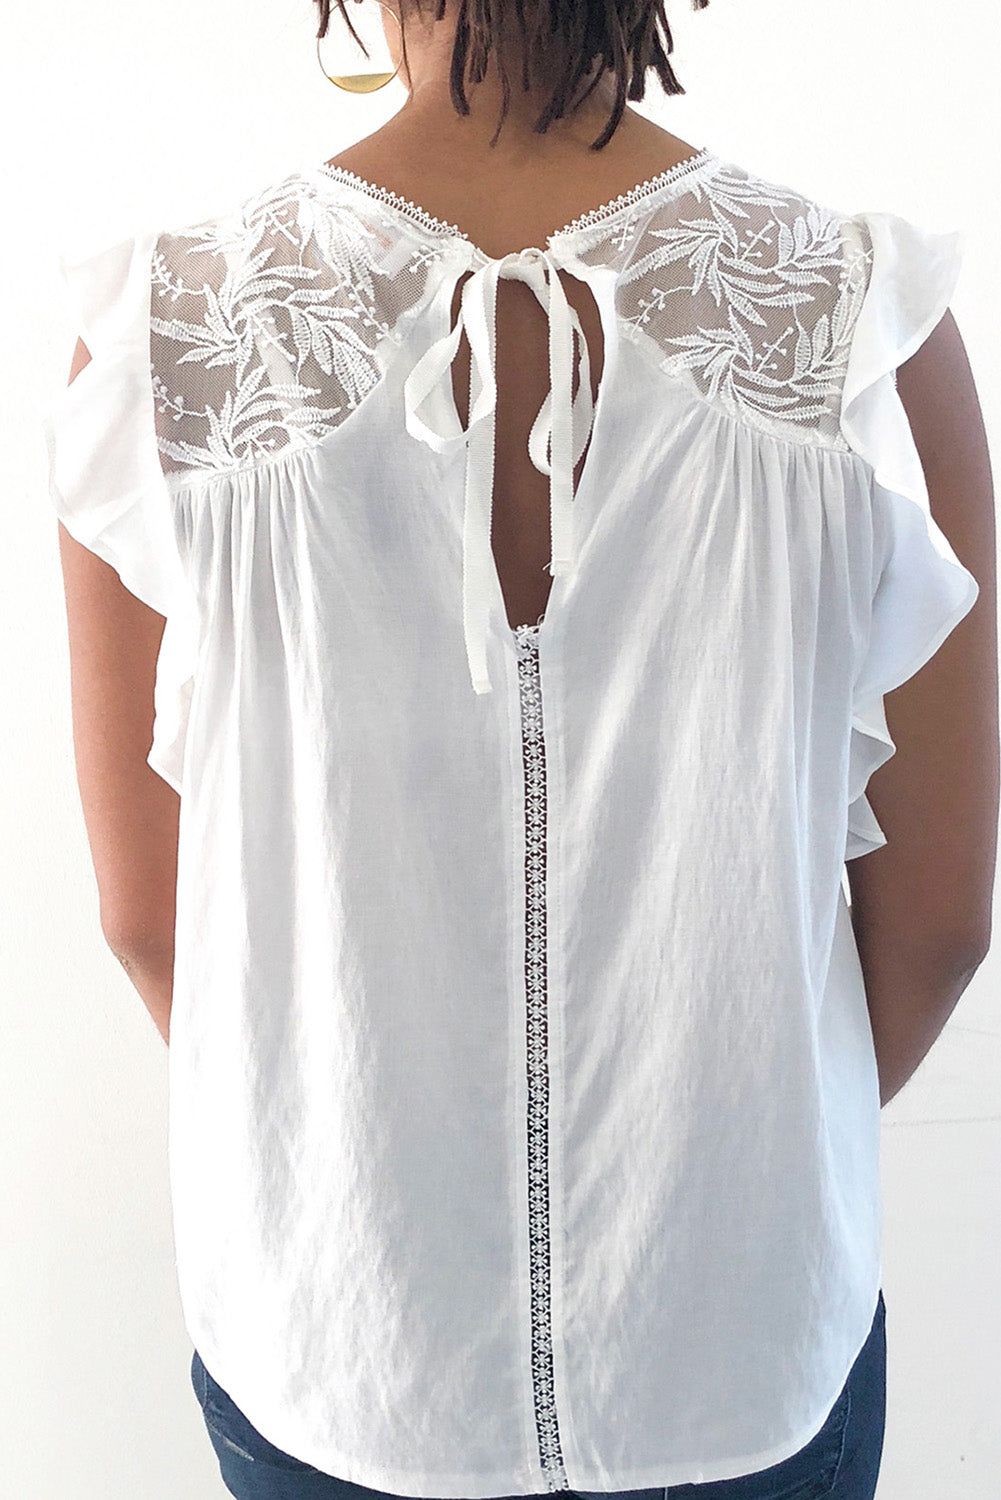 Floral Lace Yoke Pleated Flowy Top